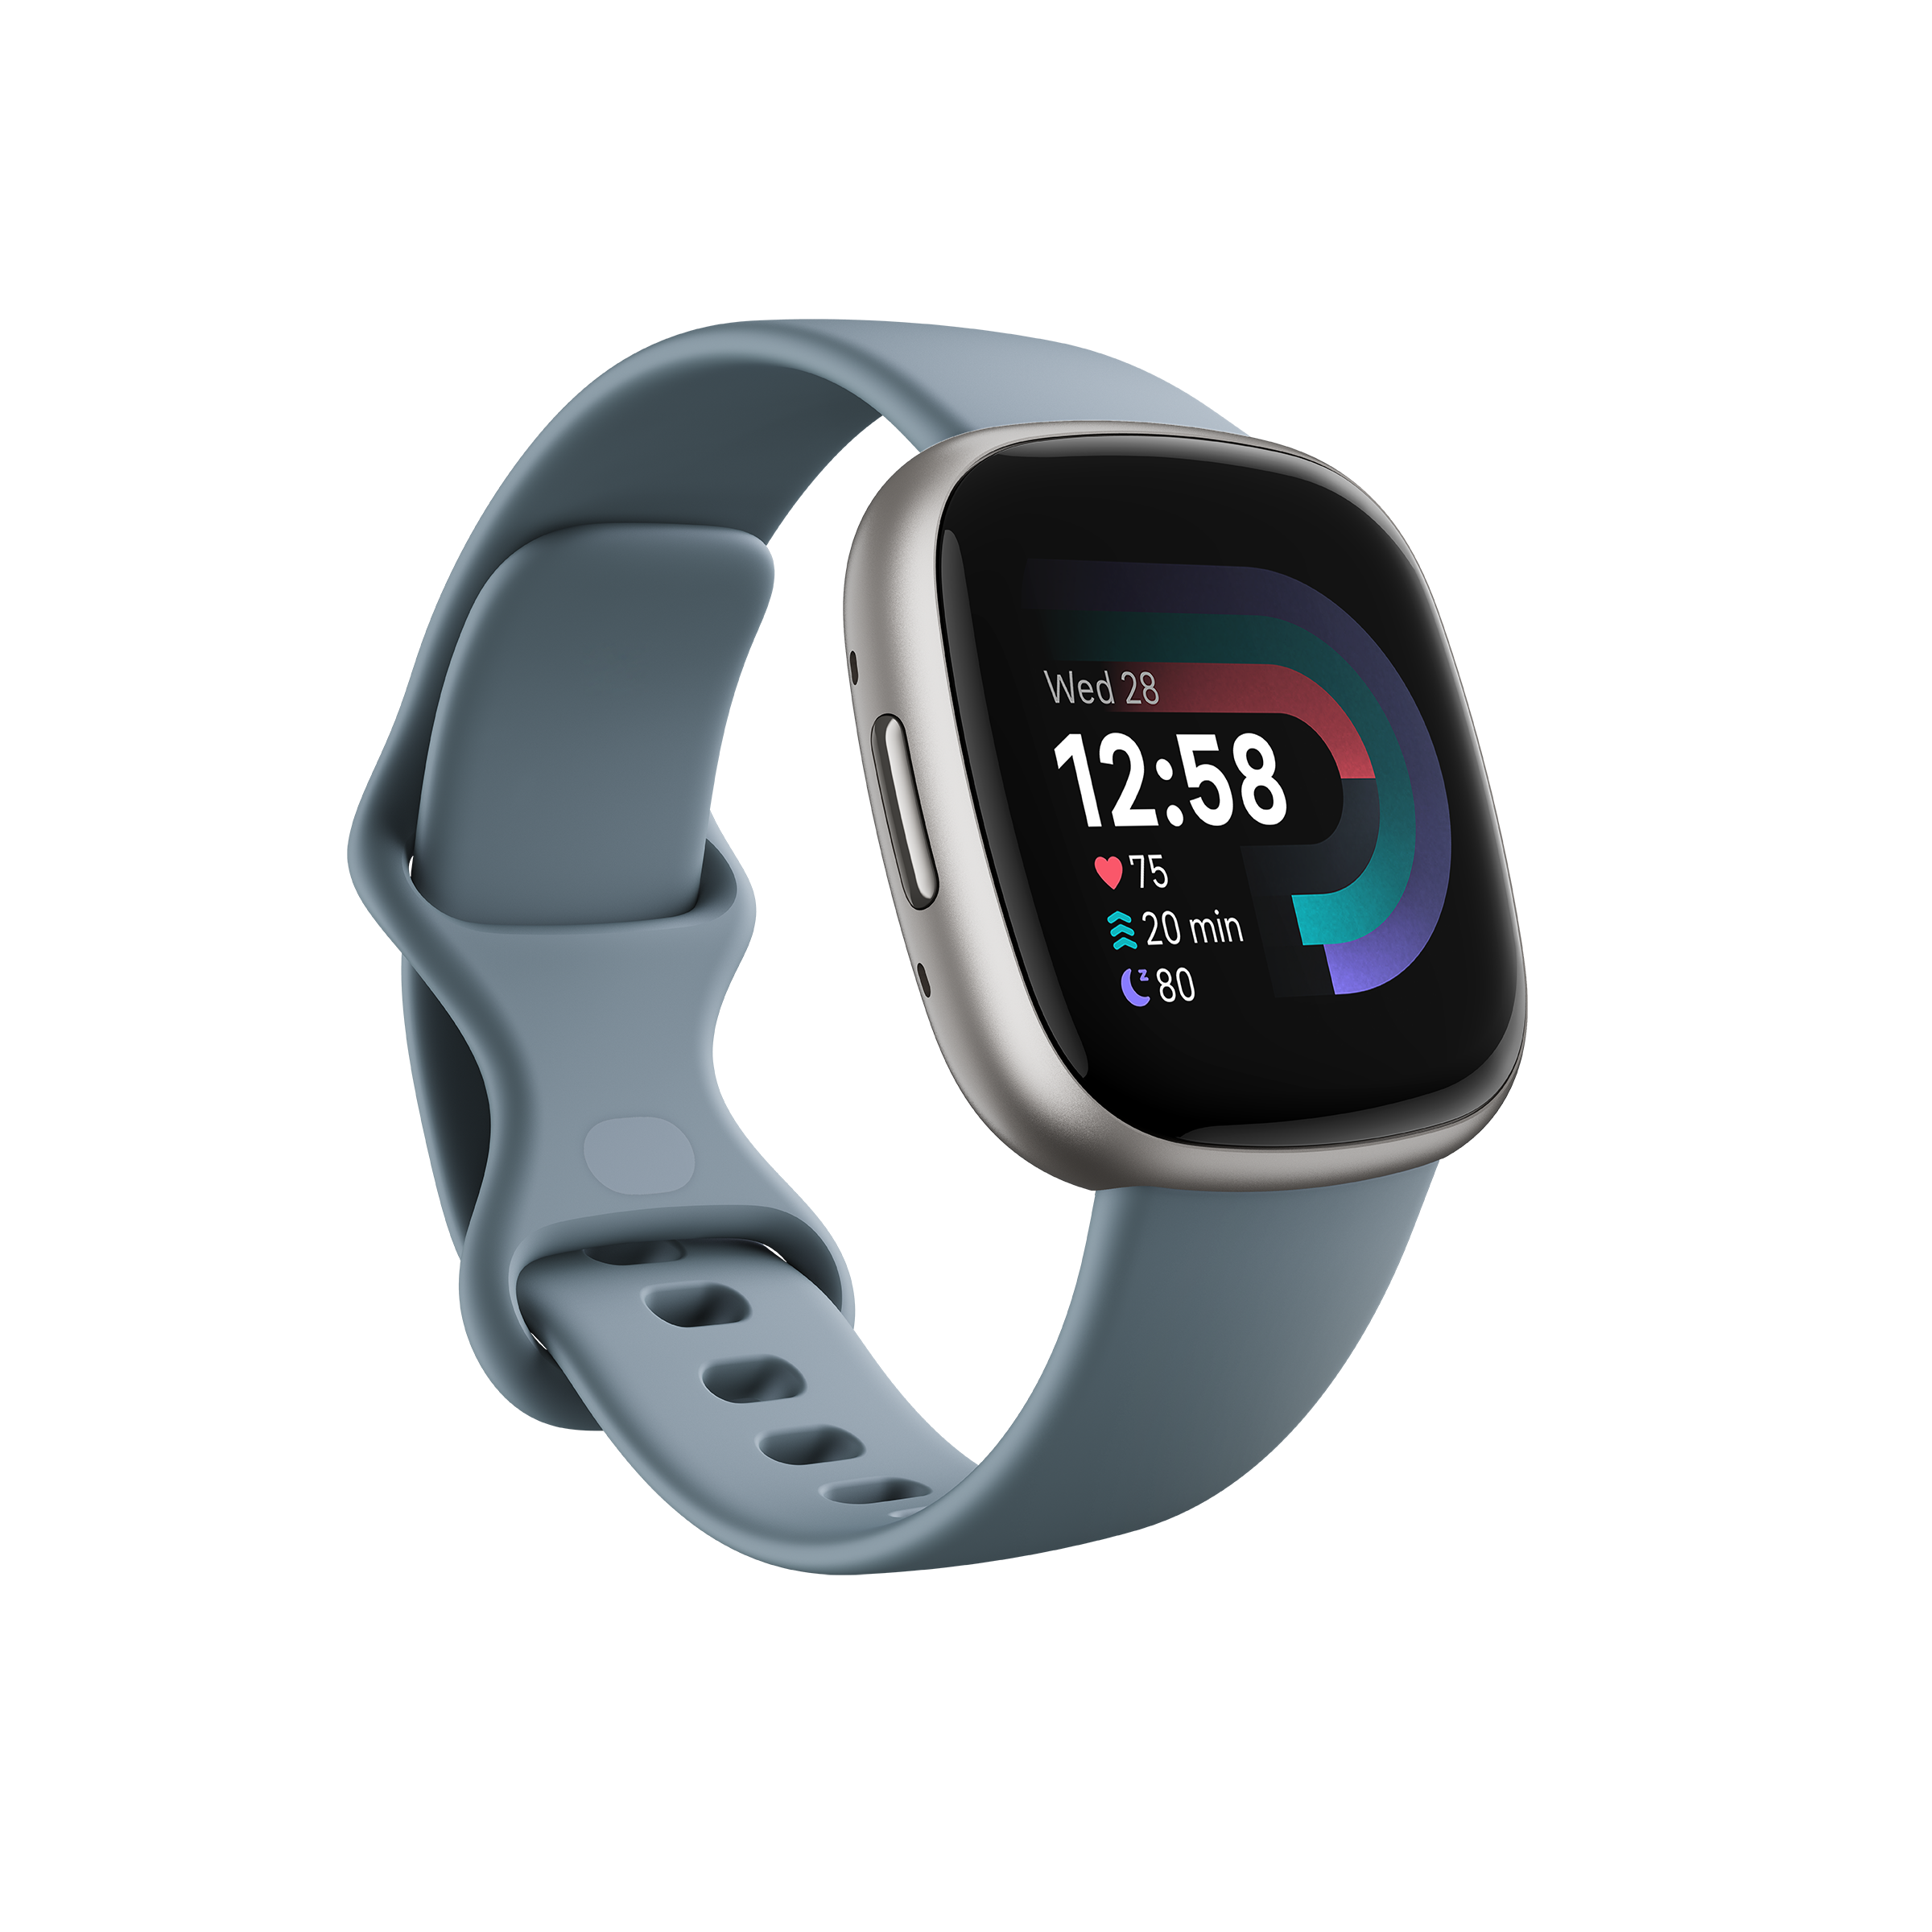 The Newest Fitbit Devices Look Real Good On The Wrist